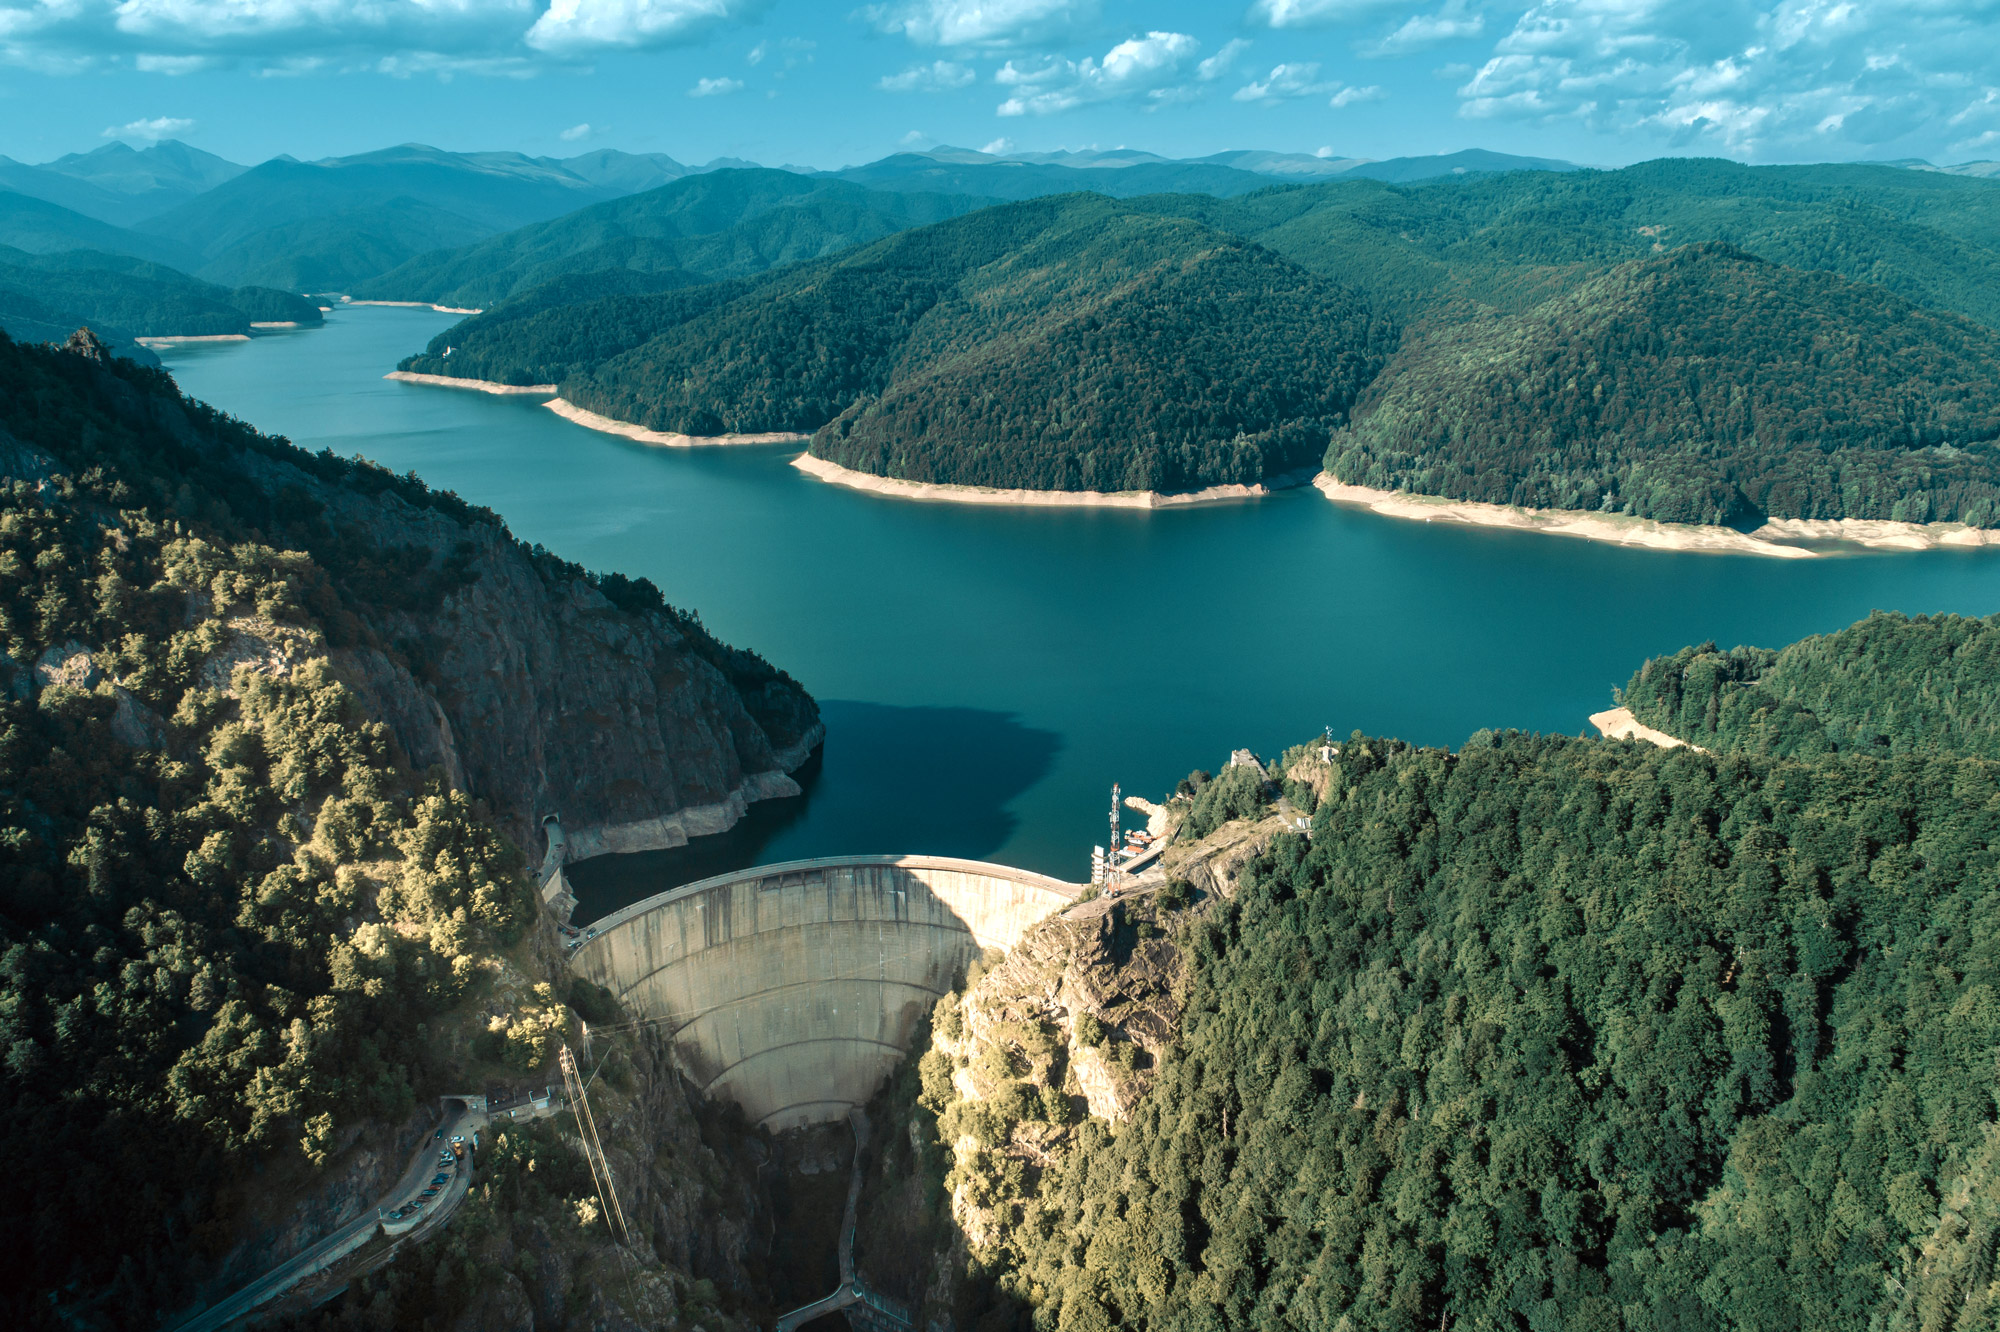 View of lake and forests with dam in foreground